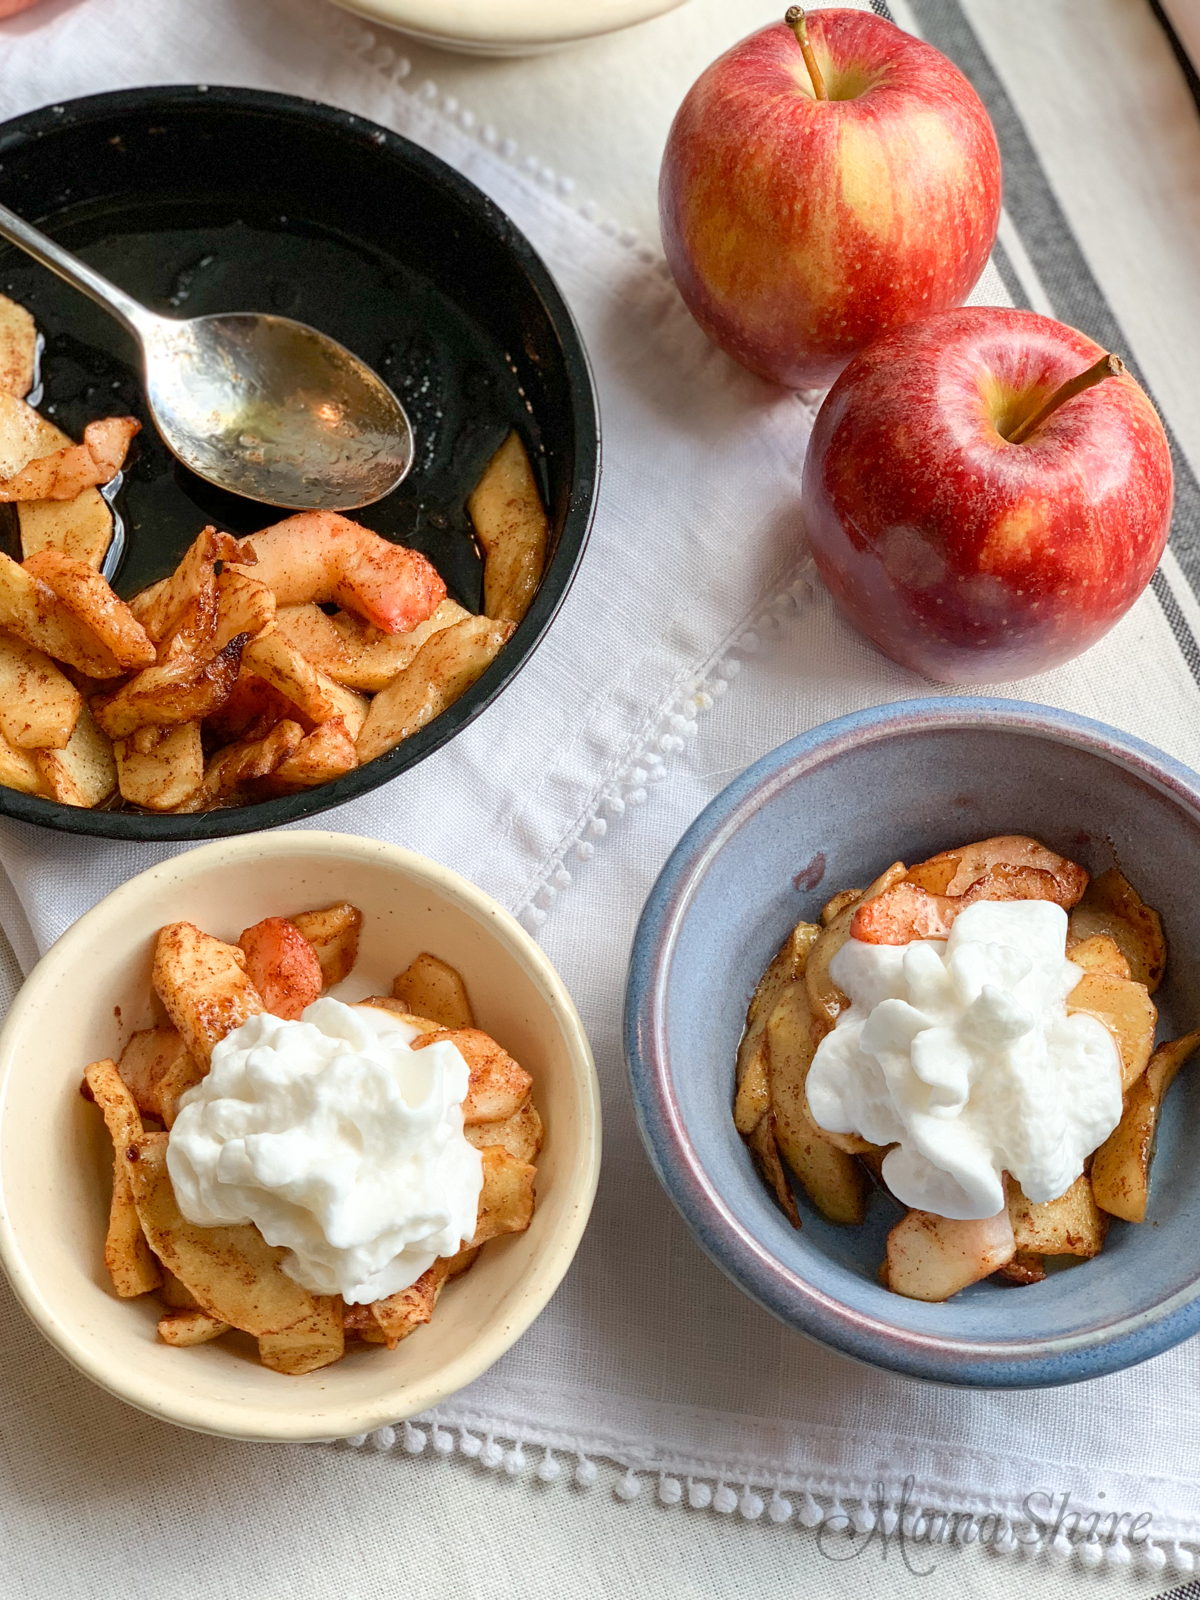 Two red apples and two serving dishes of sliced spiced apples with whipped topping on top. Yummy Air-Fried Spicy Apples